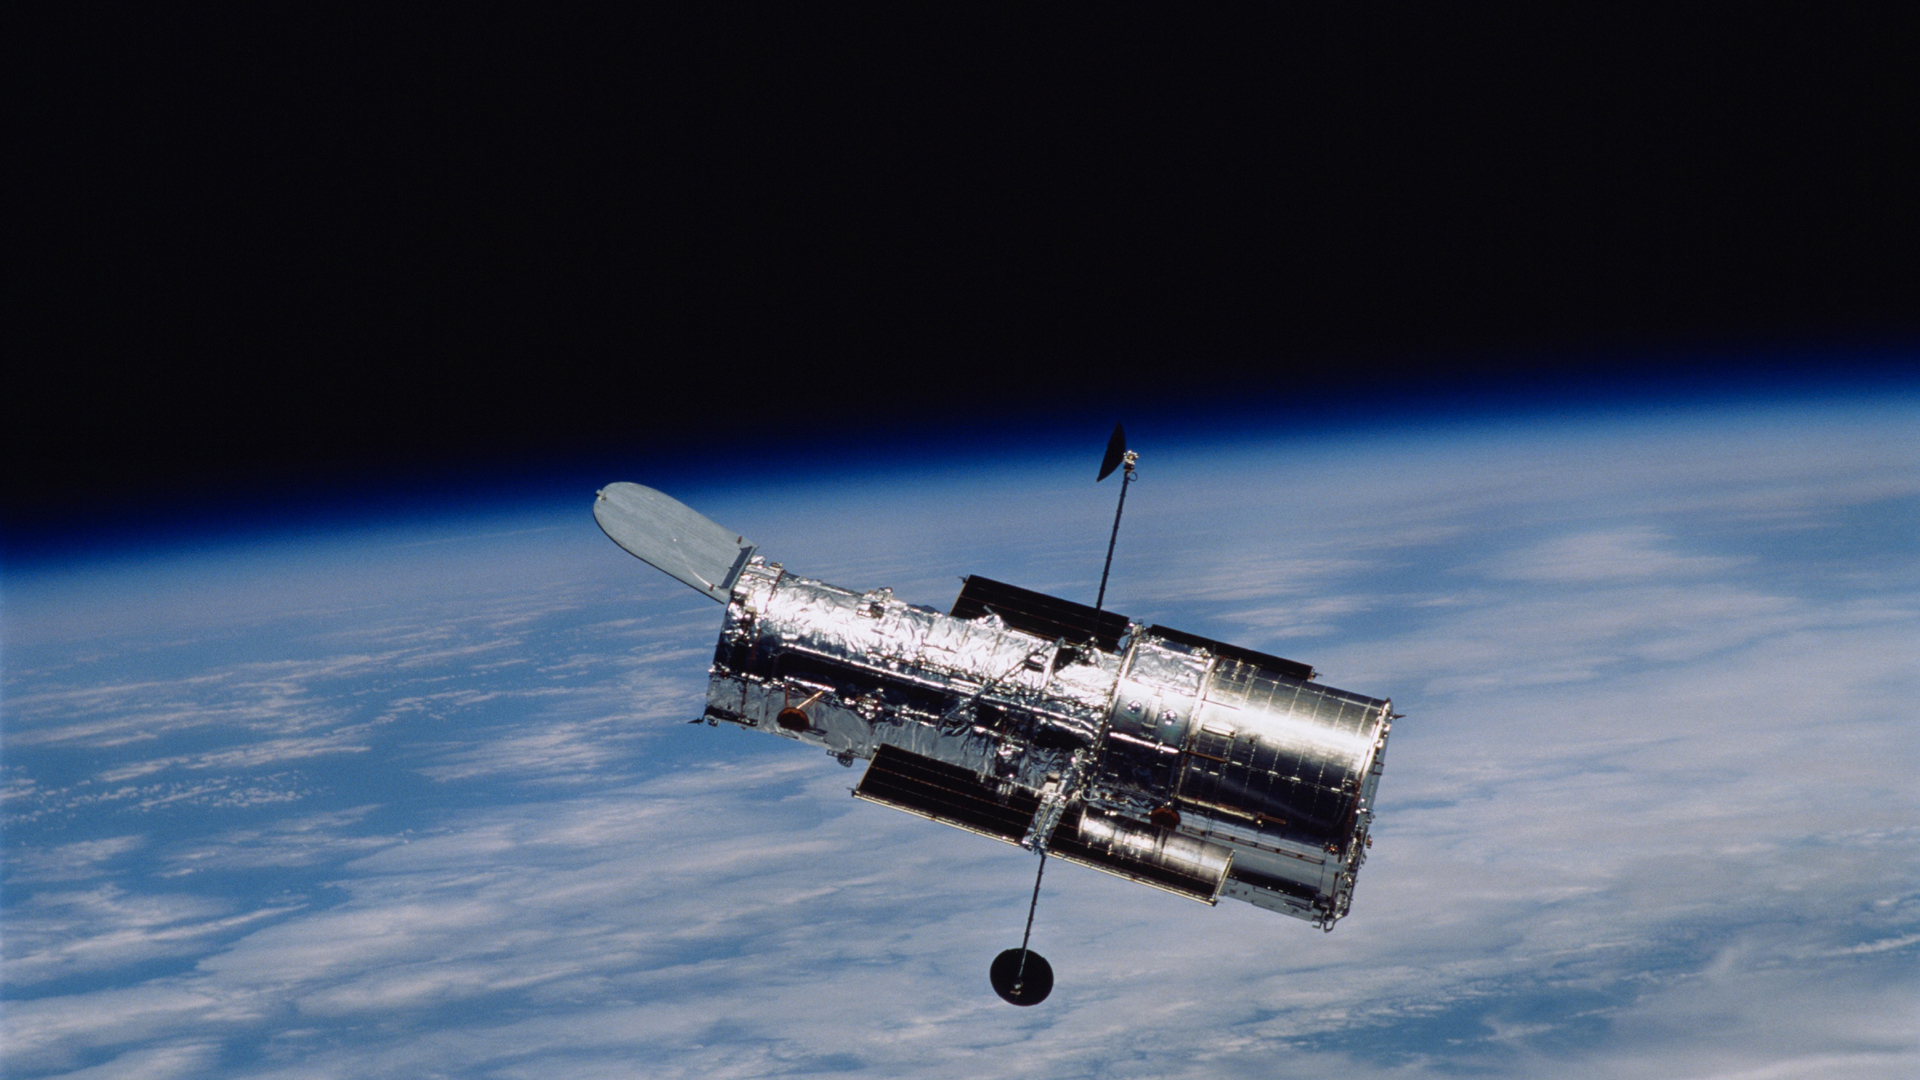 The Hubble Space Telescope supercharged astronomical research.